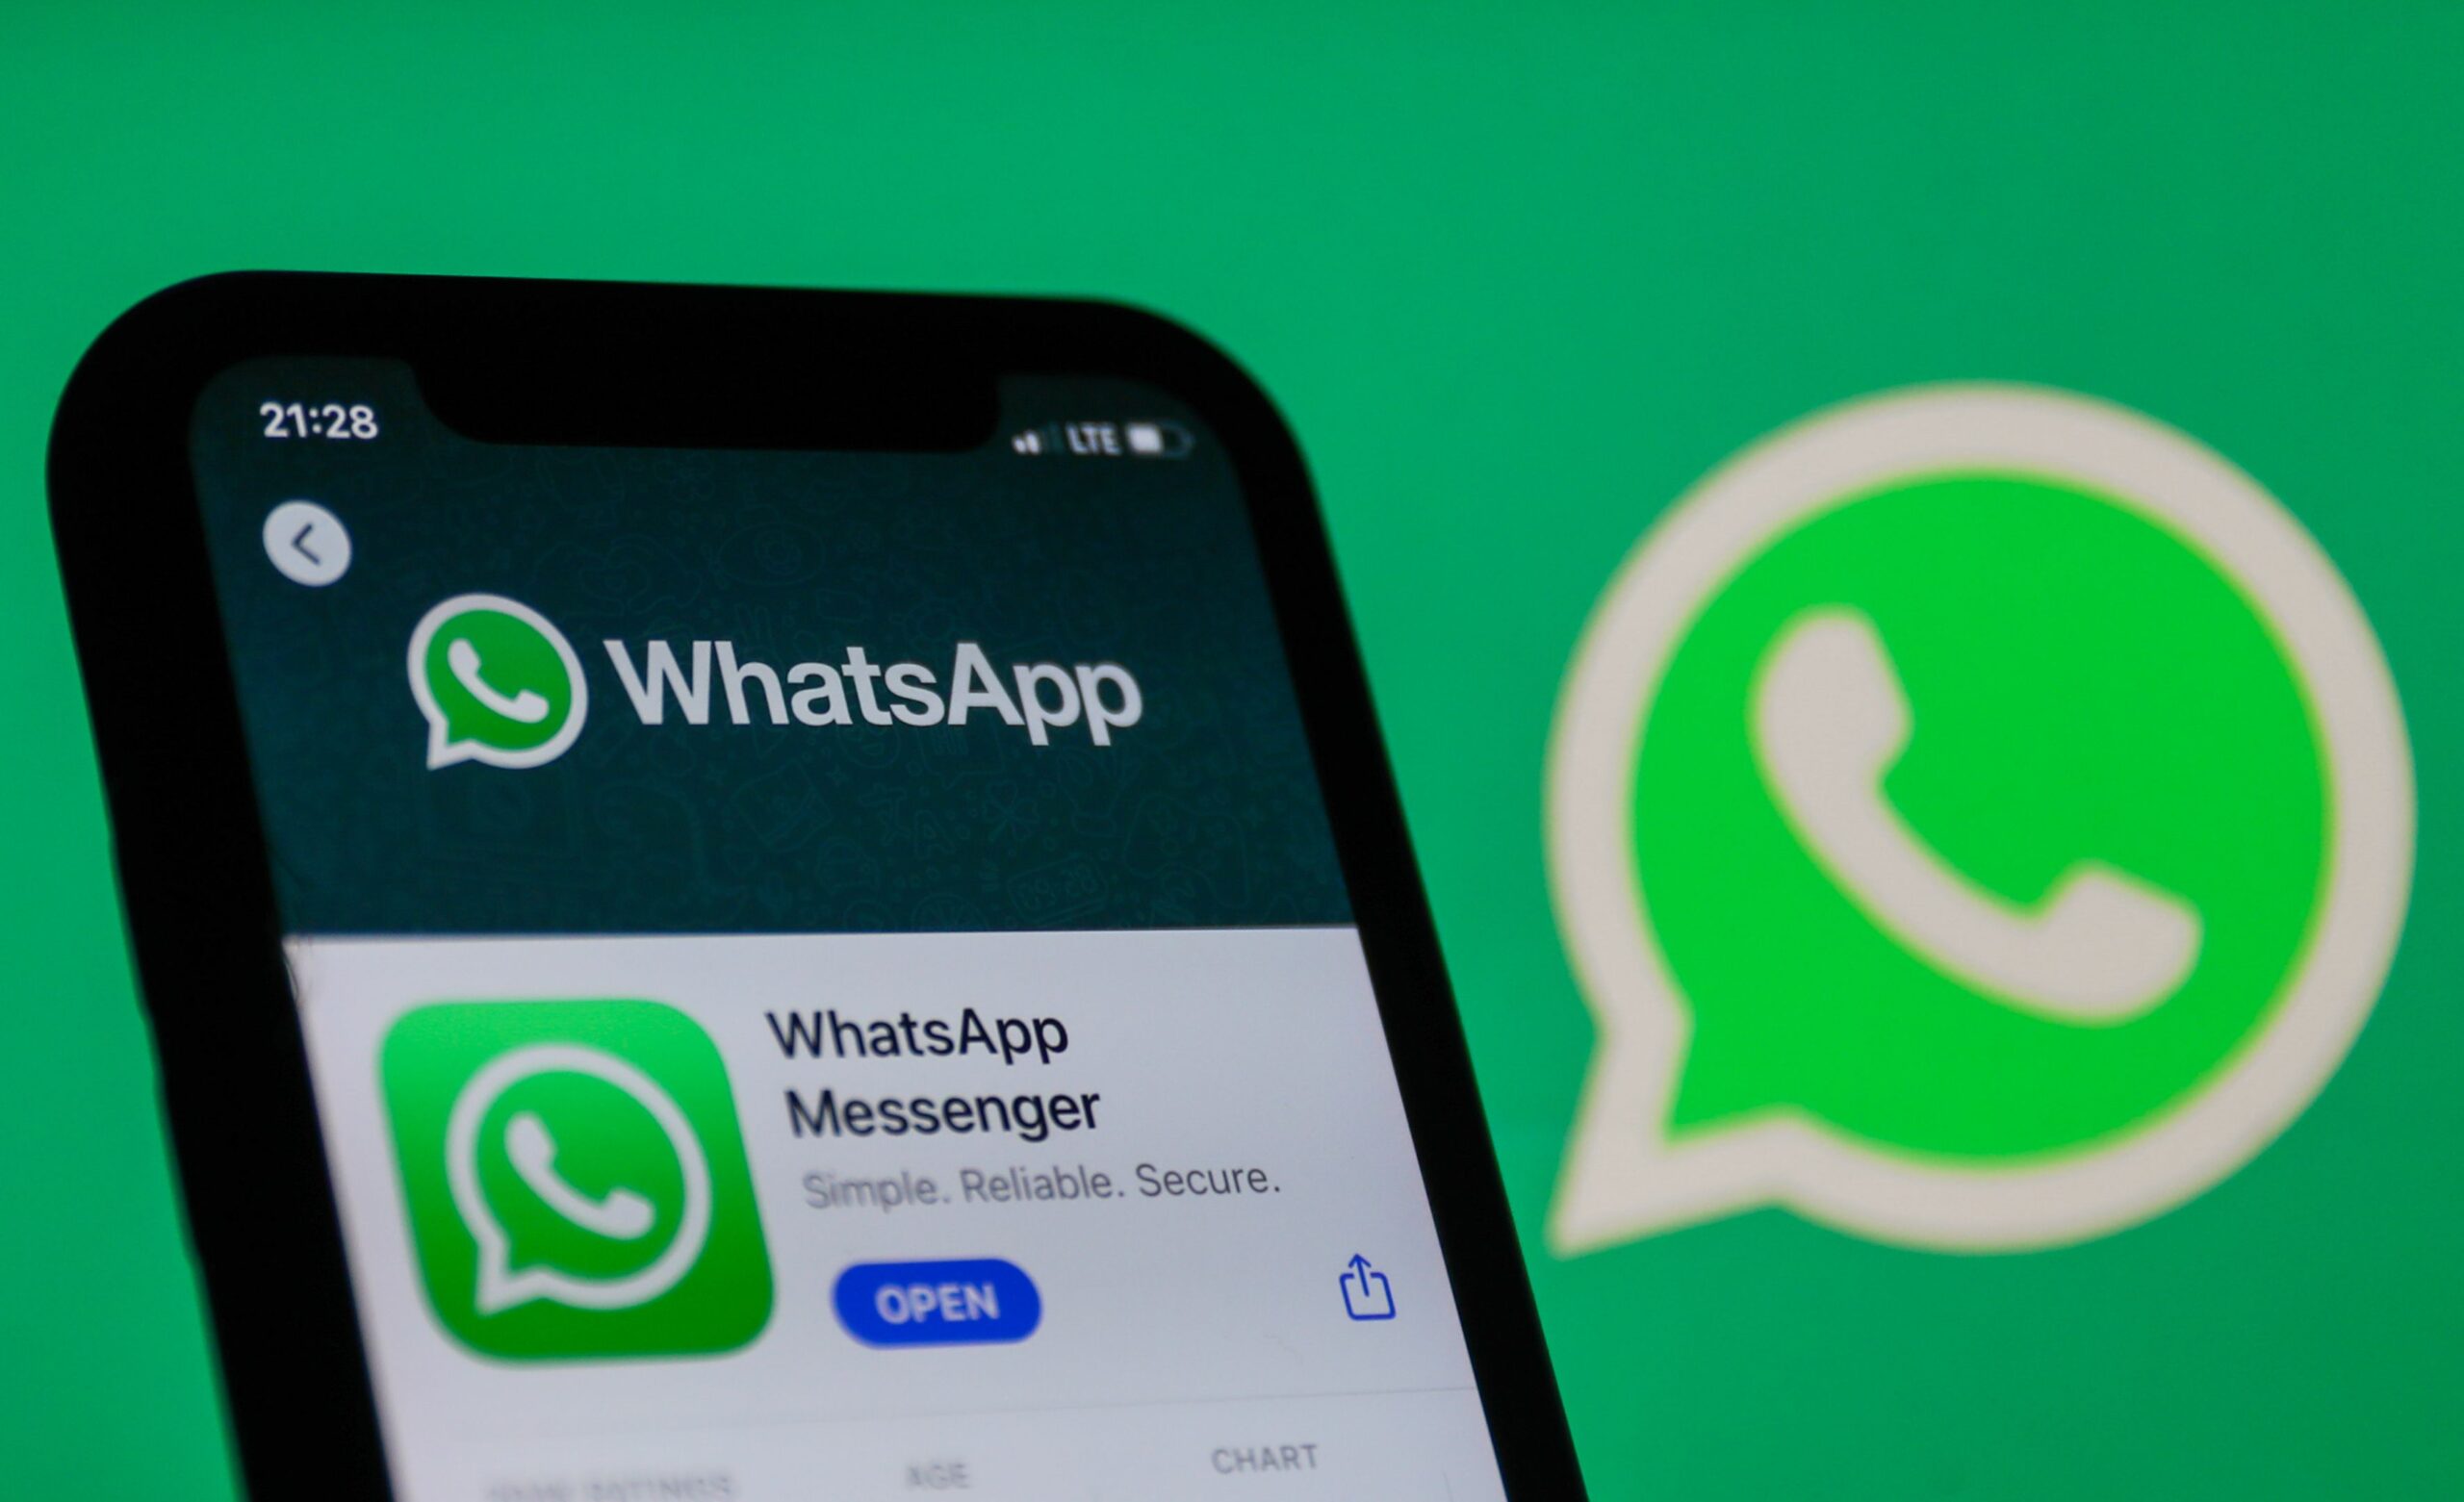 Just In: WhatsApp is adding encrypted backups